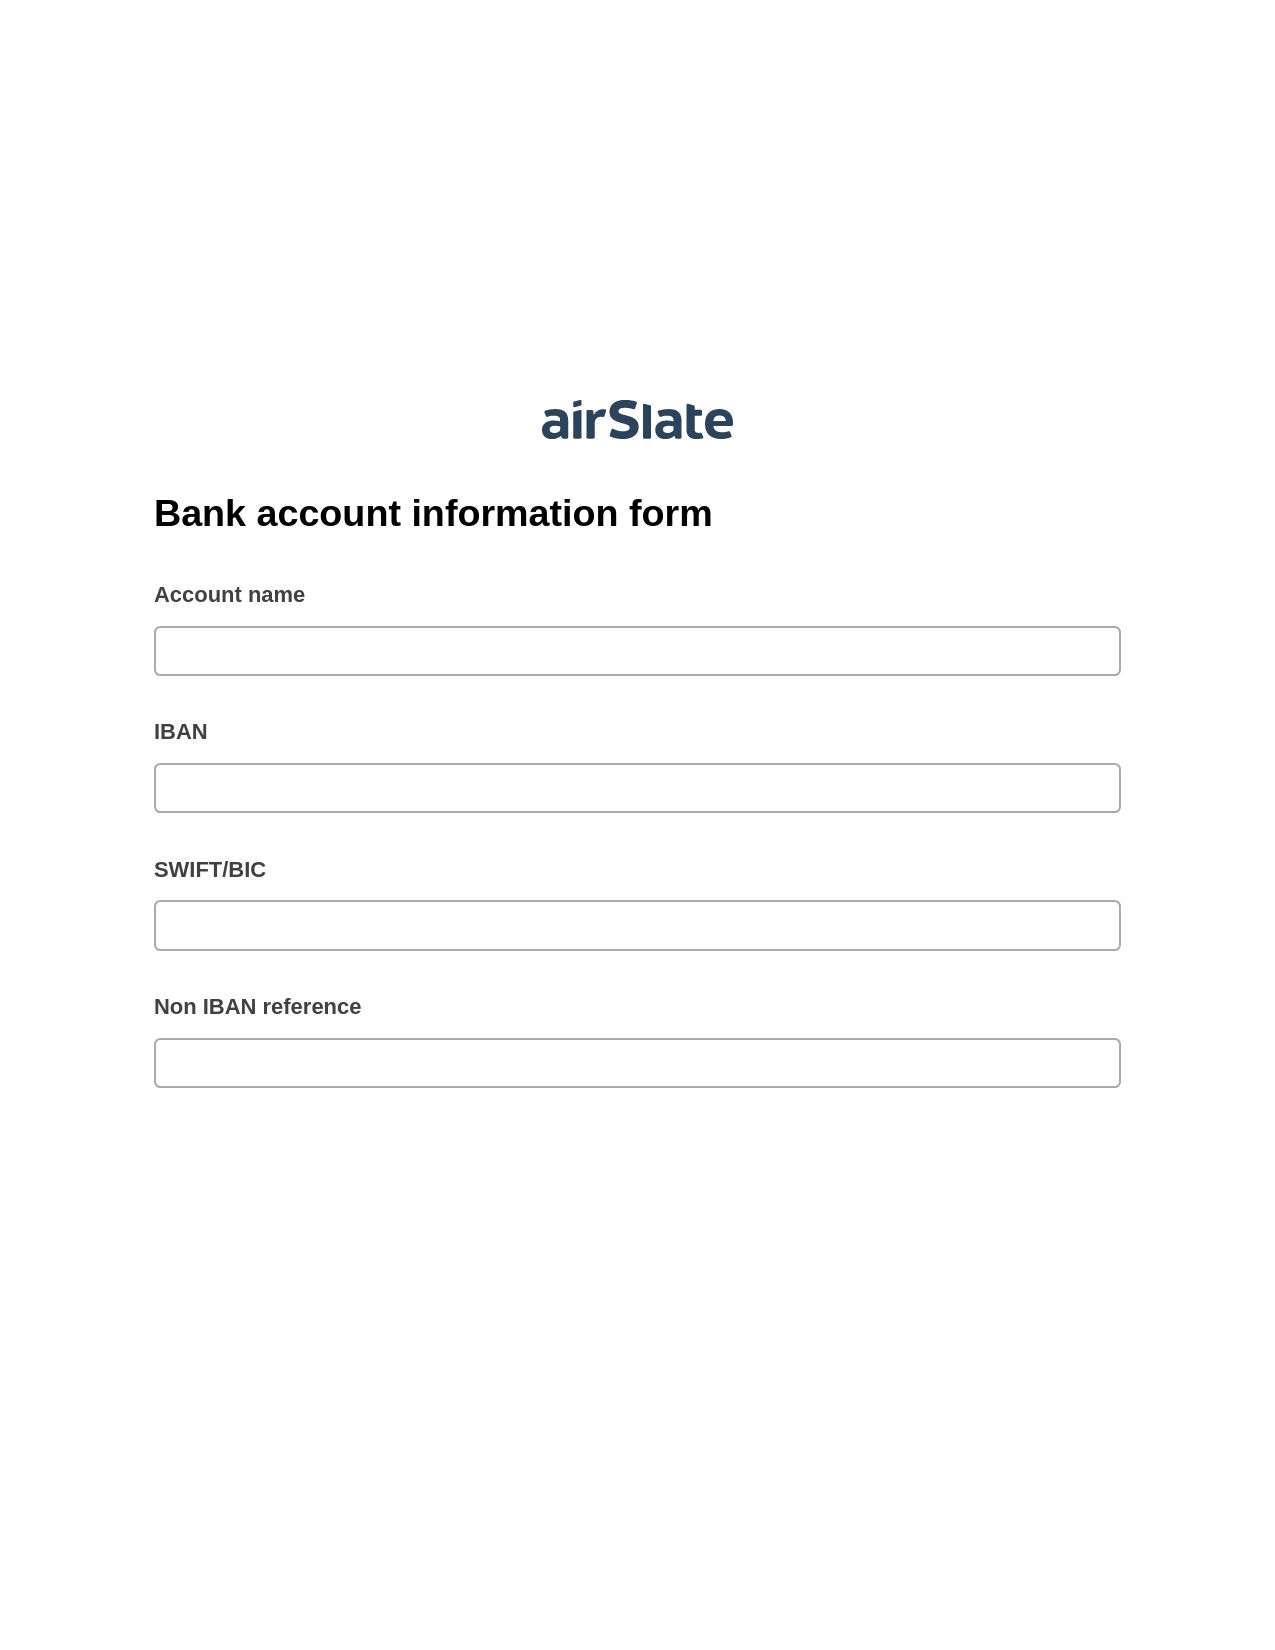 Multirole Bank account information form Pre-fill from Salesforce Record Bot, In-person Signing Bot, Export to Excel 365 Bot